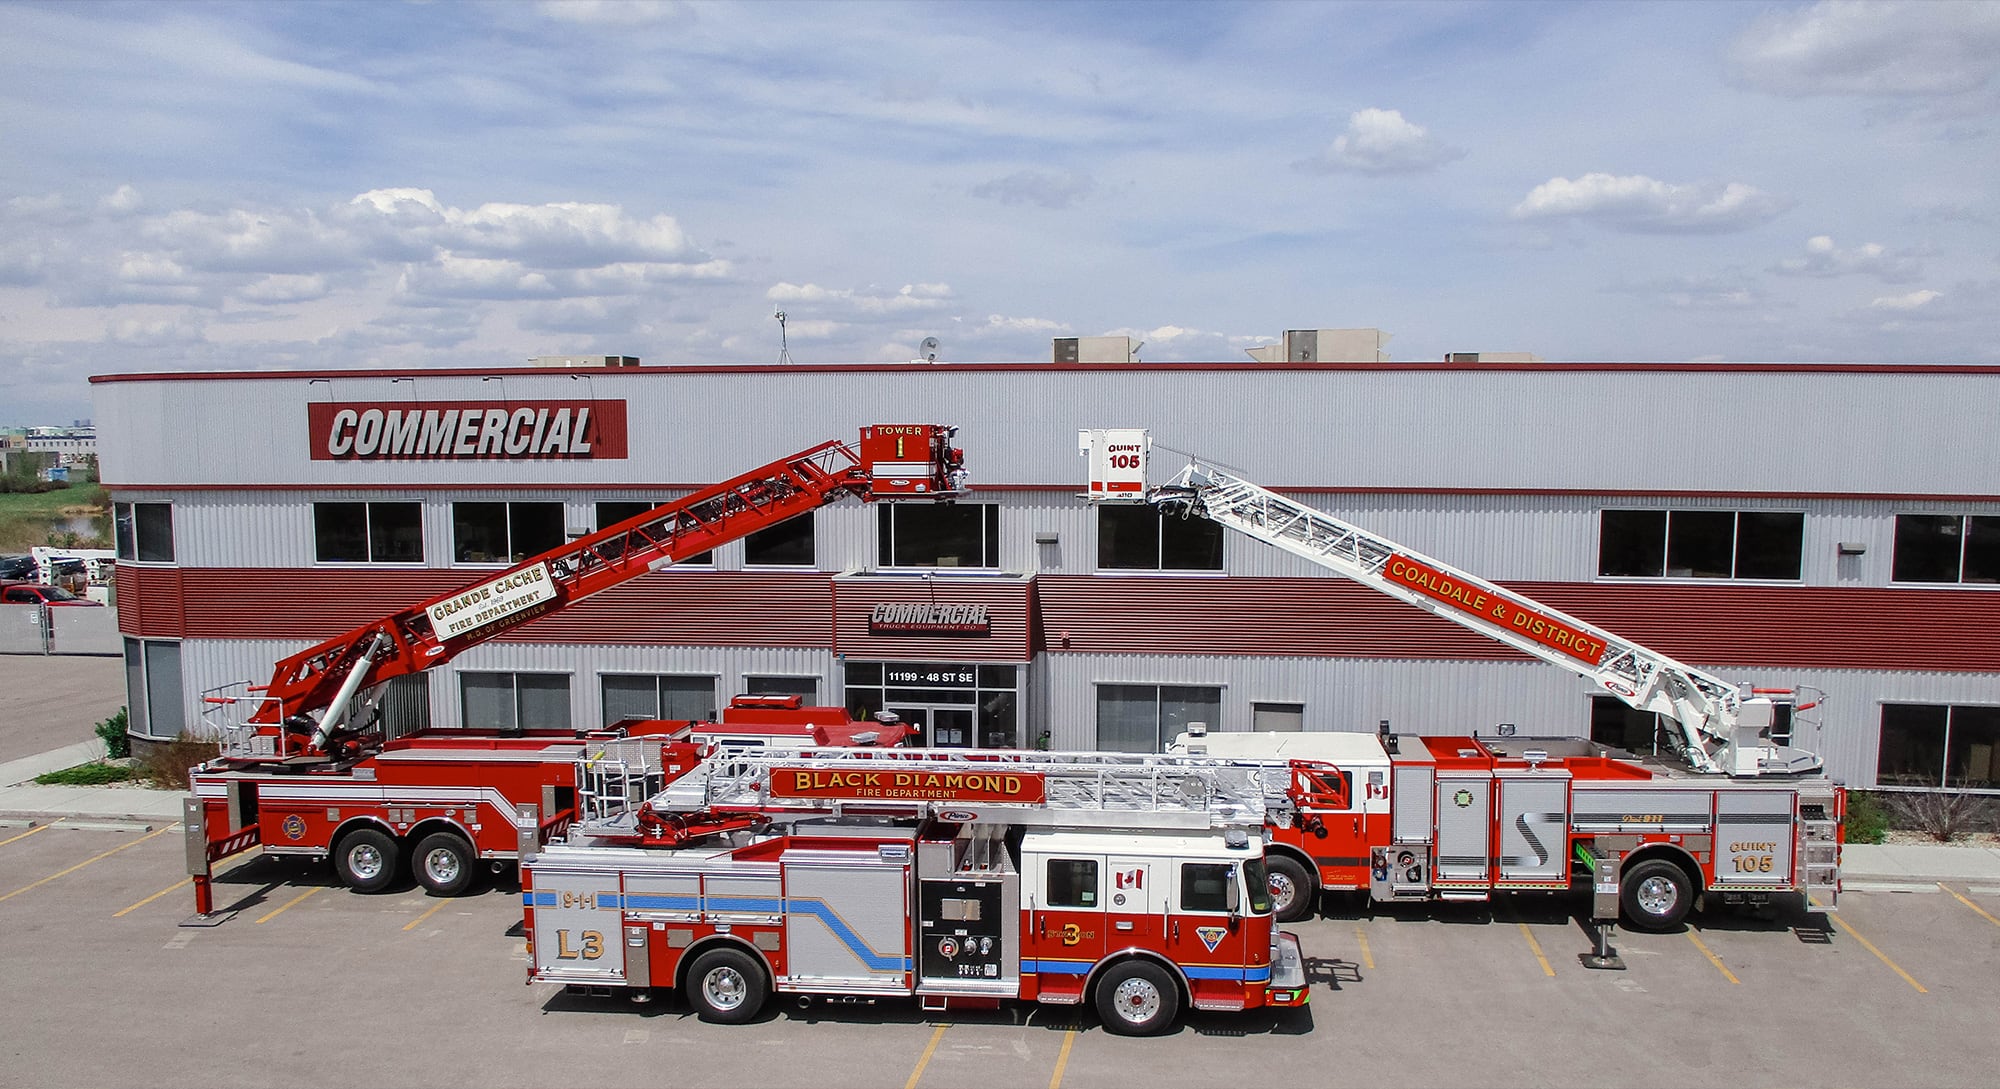 fire trucks on display at commercial emergency equipment